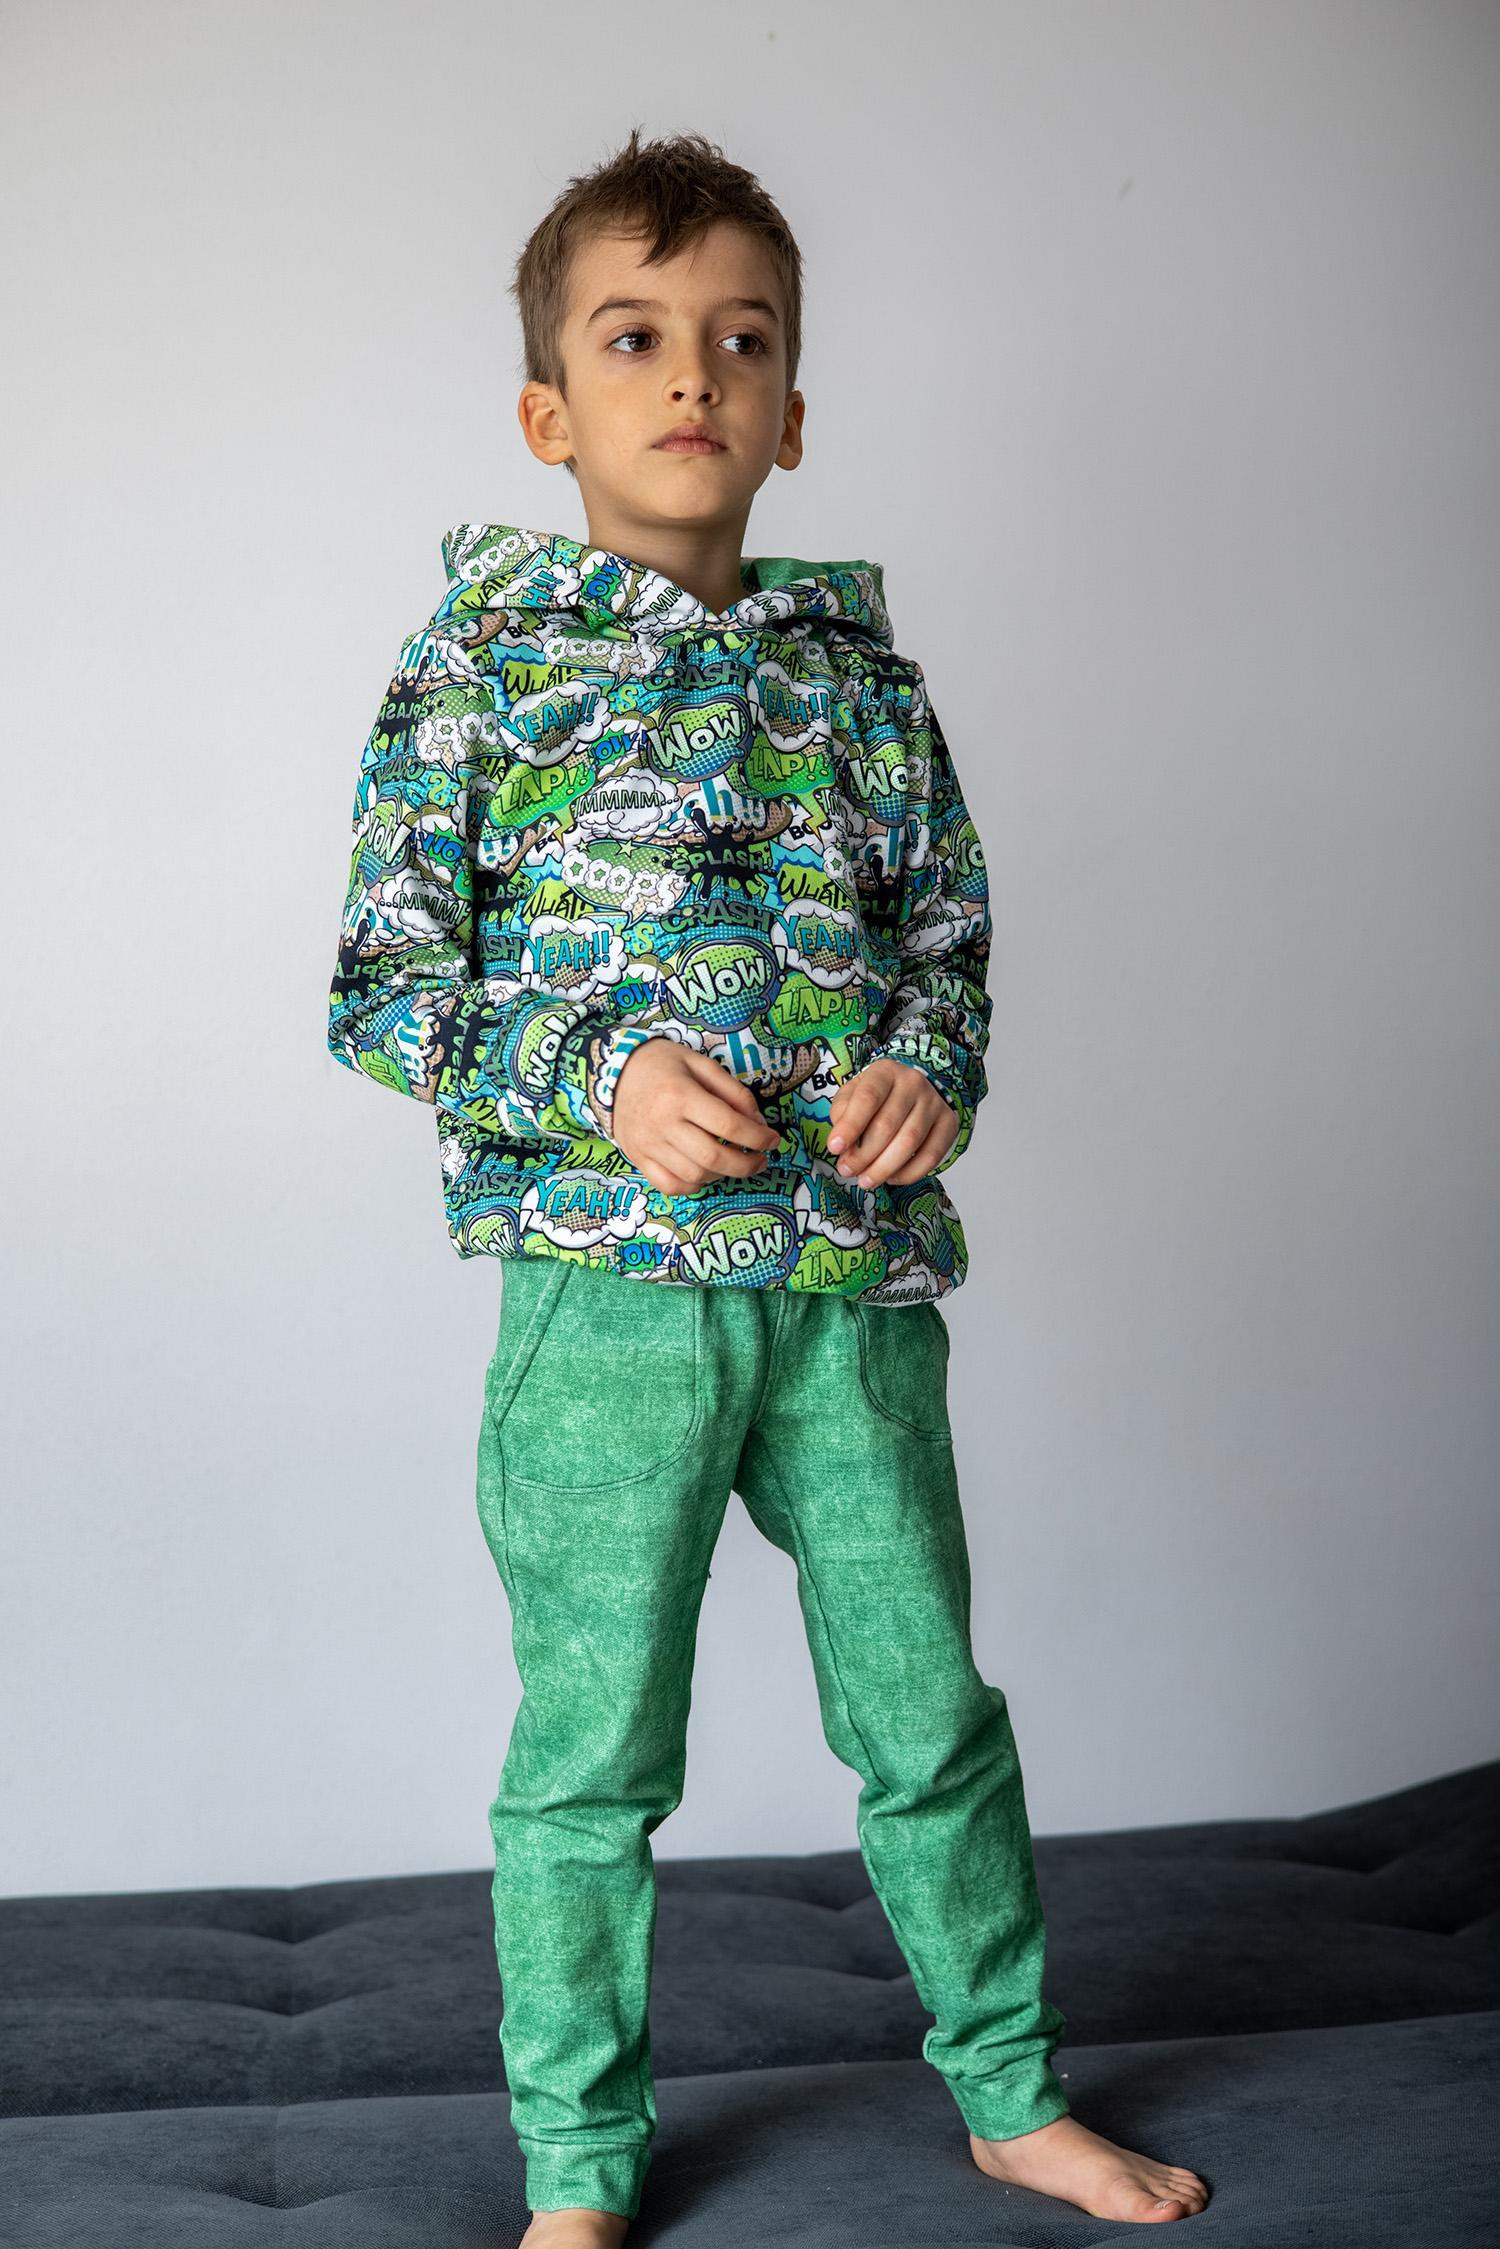 Children's tracksuit (OSLO) - PURPLE MOUNTAINS - sewing set